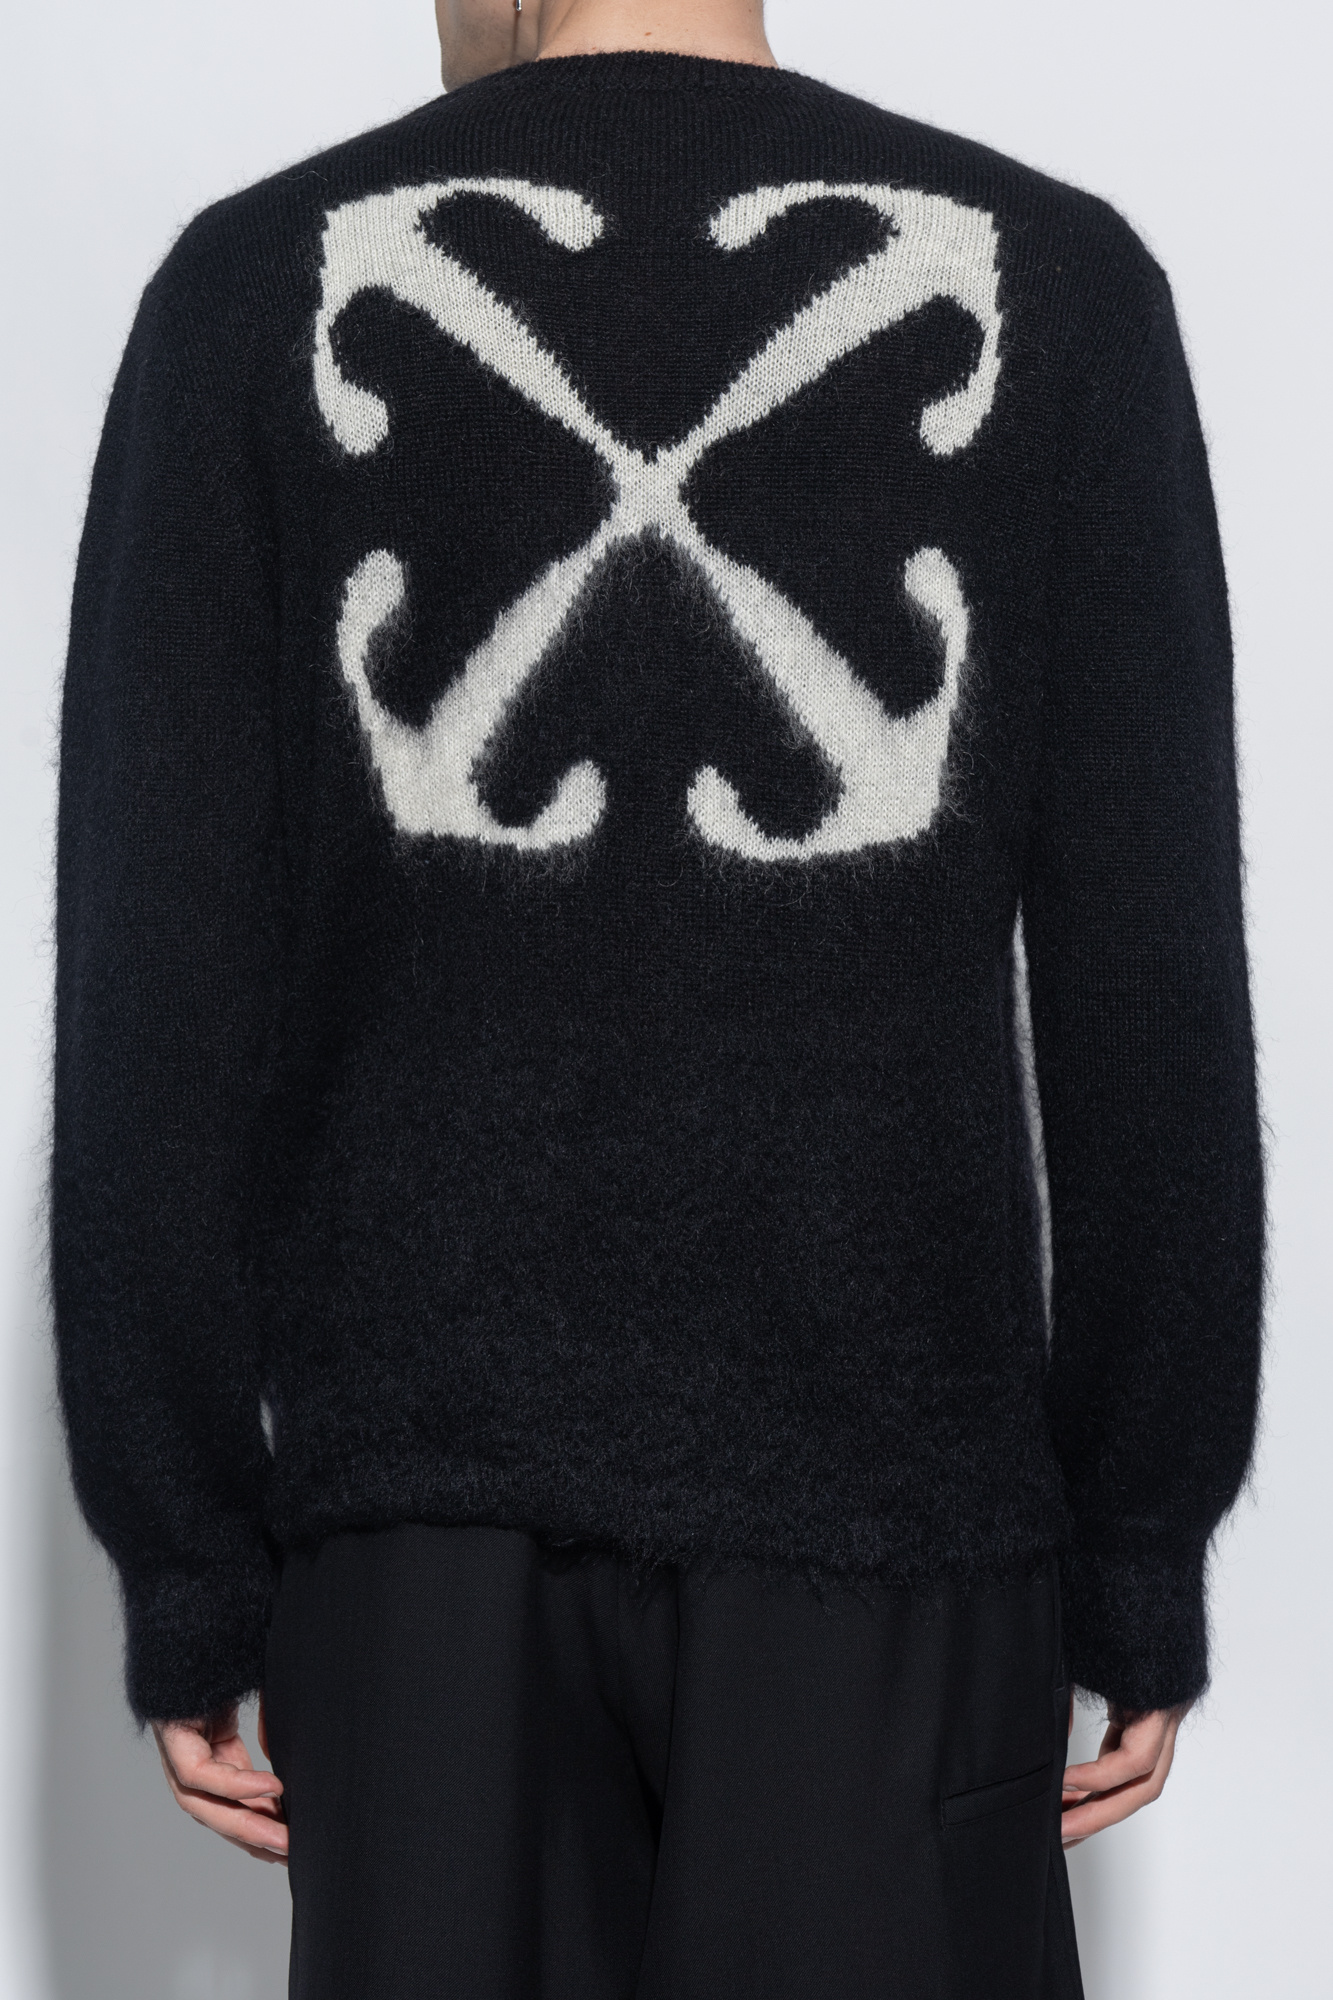 Off-White Sweater with motif of arrows